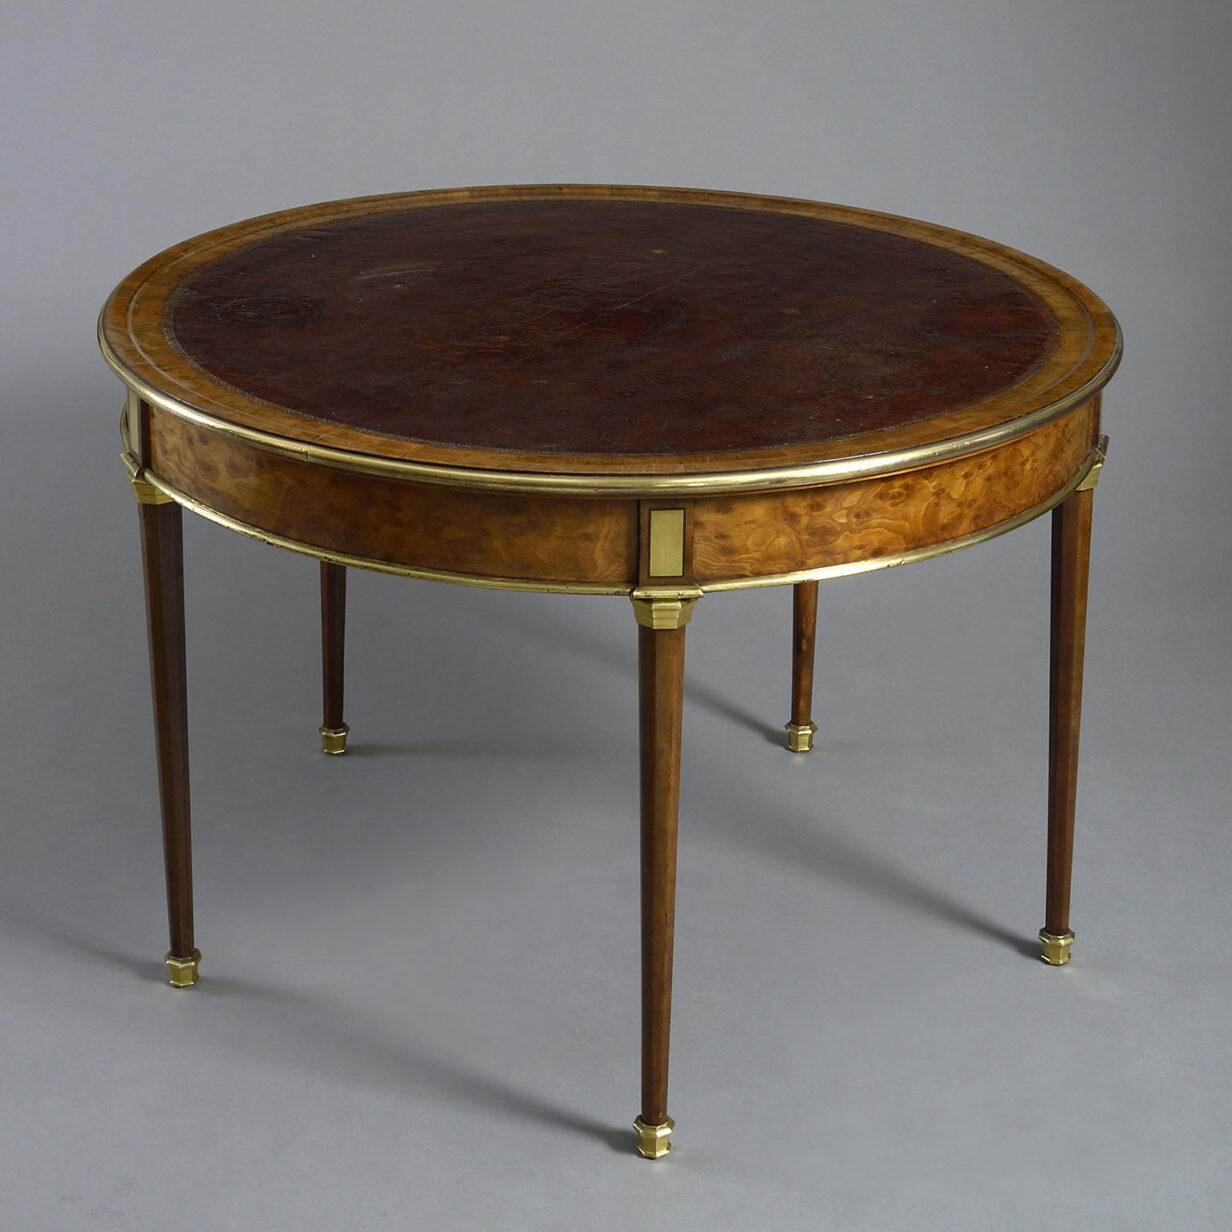 19th century leather topped burr walnut centre table